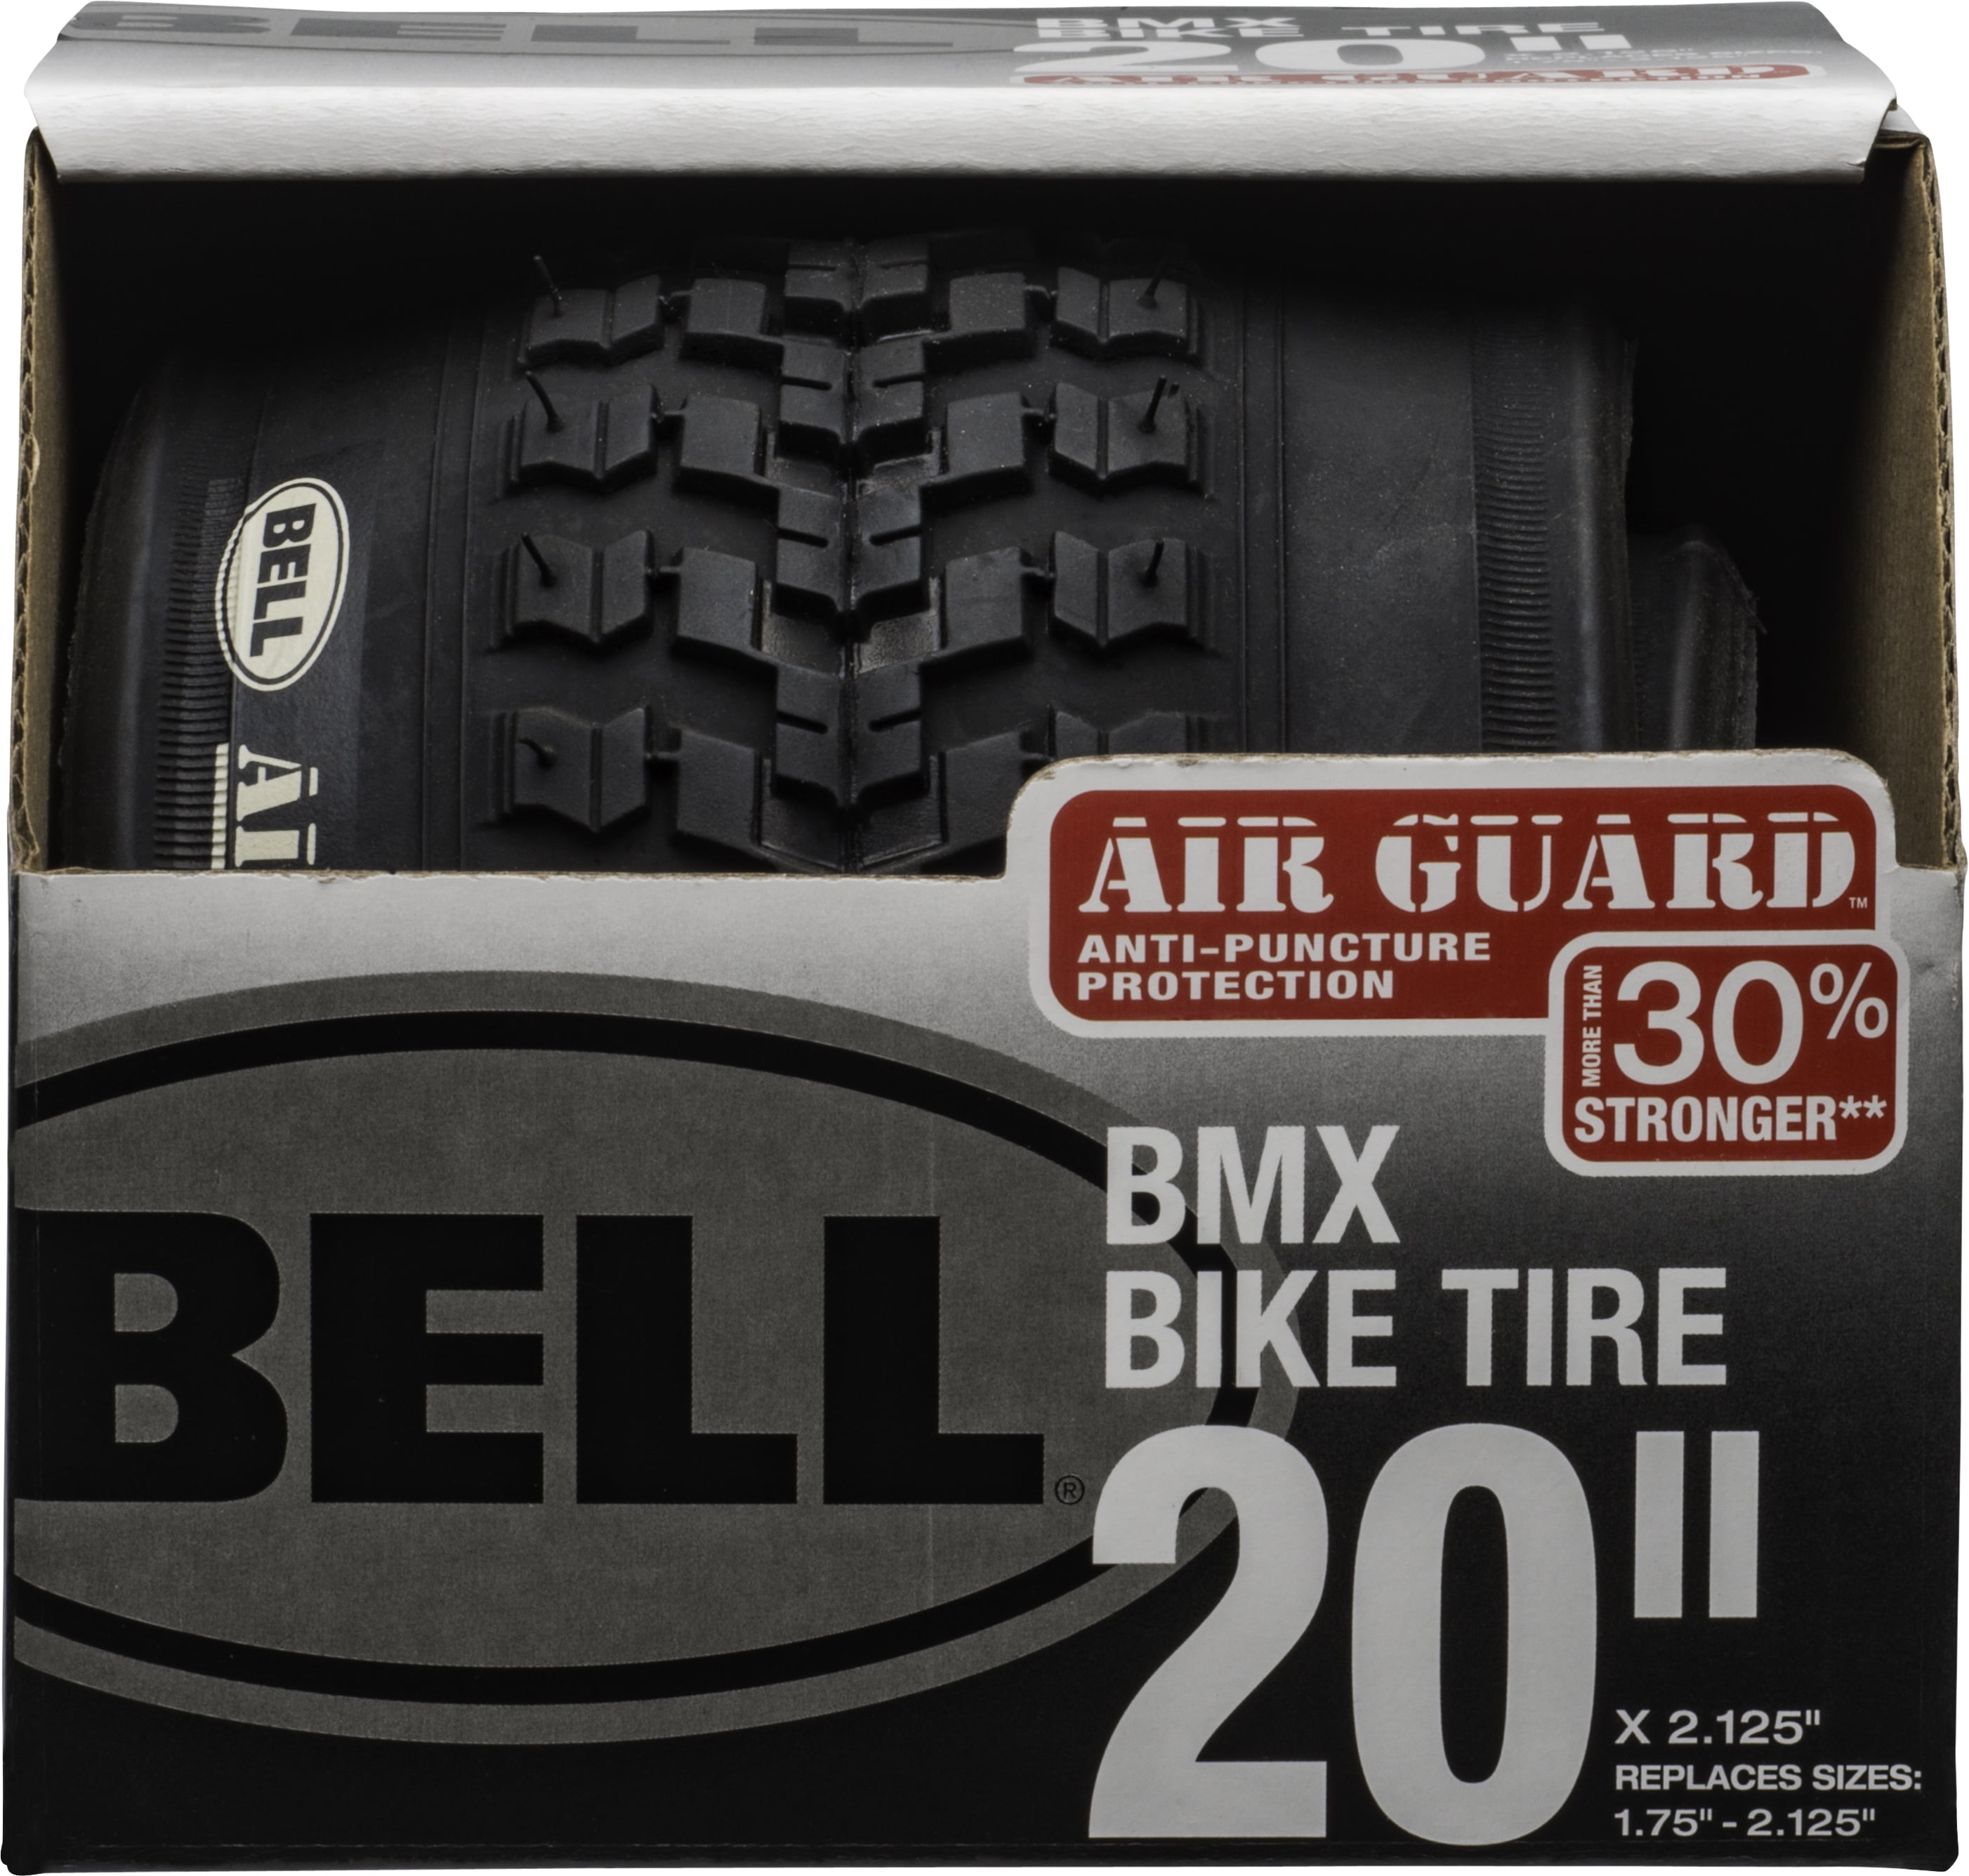 Bell 4 x 20" inch Bike Inner Tube 20 x 1.75-2.25 Bicycle Rubber BMX 